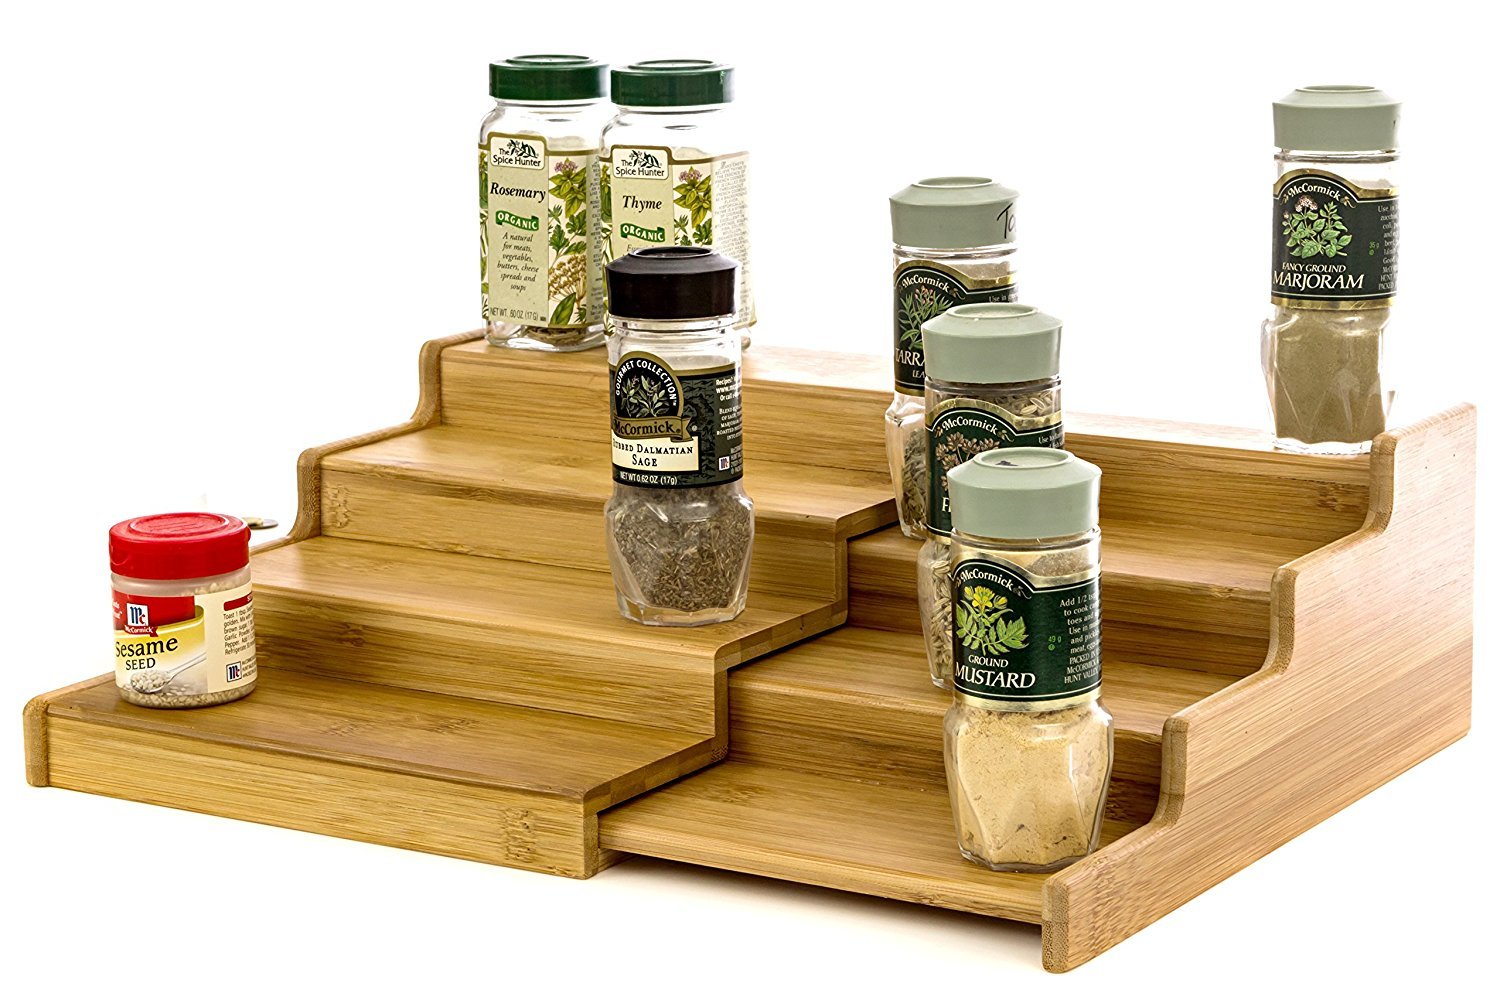 Expendable Spice Rack, Spice Shelf, Spice Storage Organizer 4 Tier Made of Organice Bamboo by Intriom Bamboo Collection